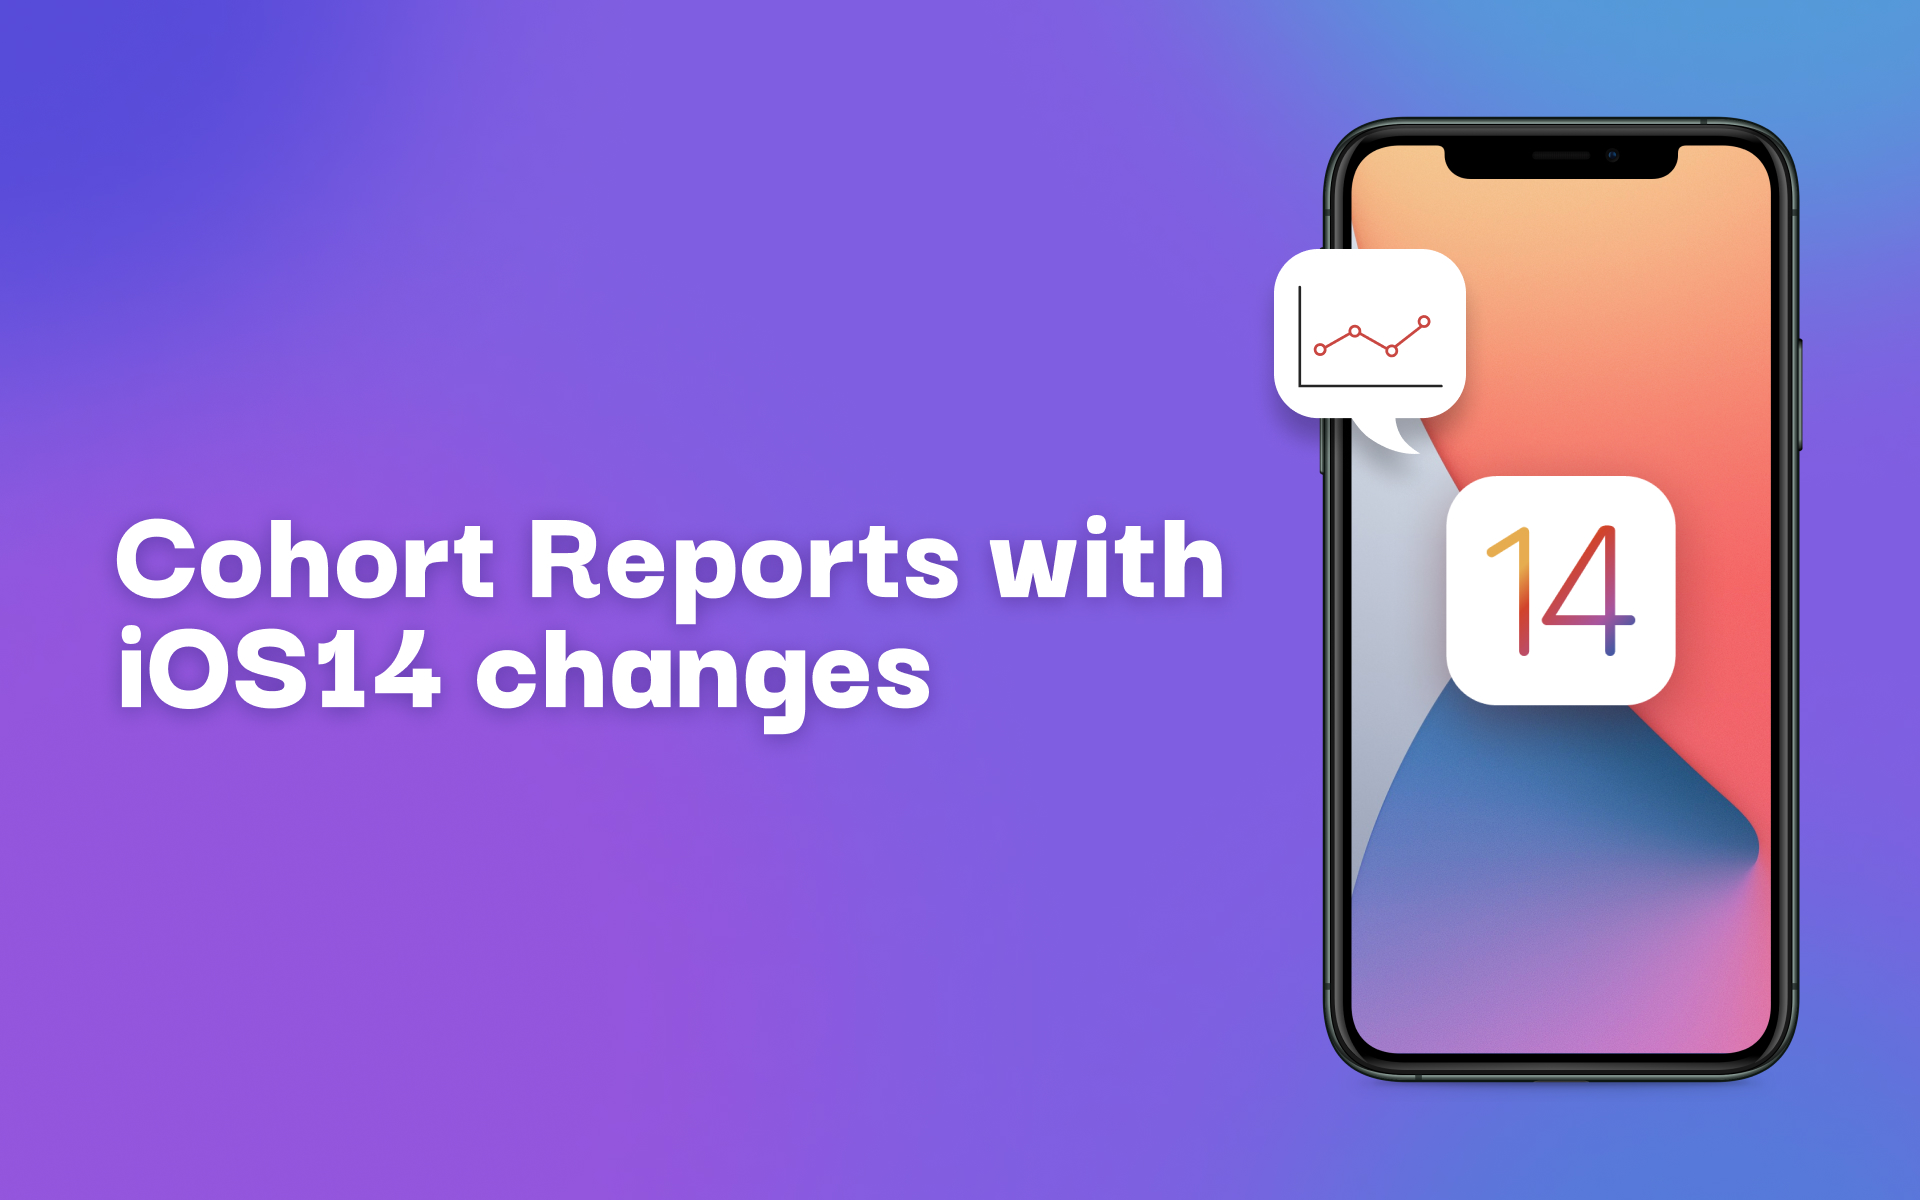 Cohort Reports with iOS14 changes